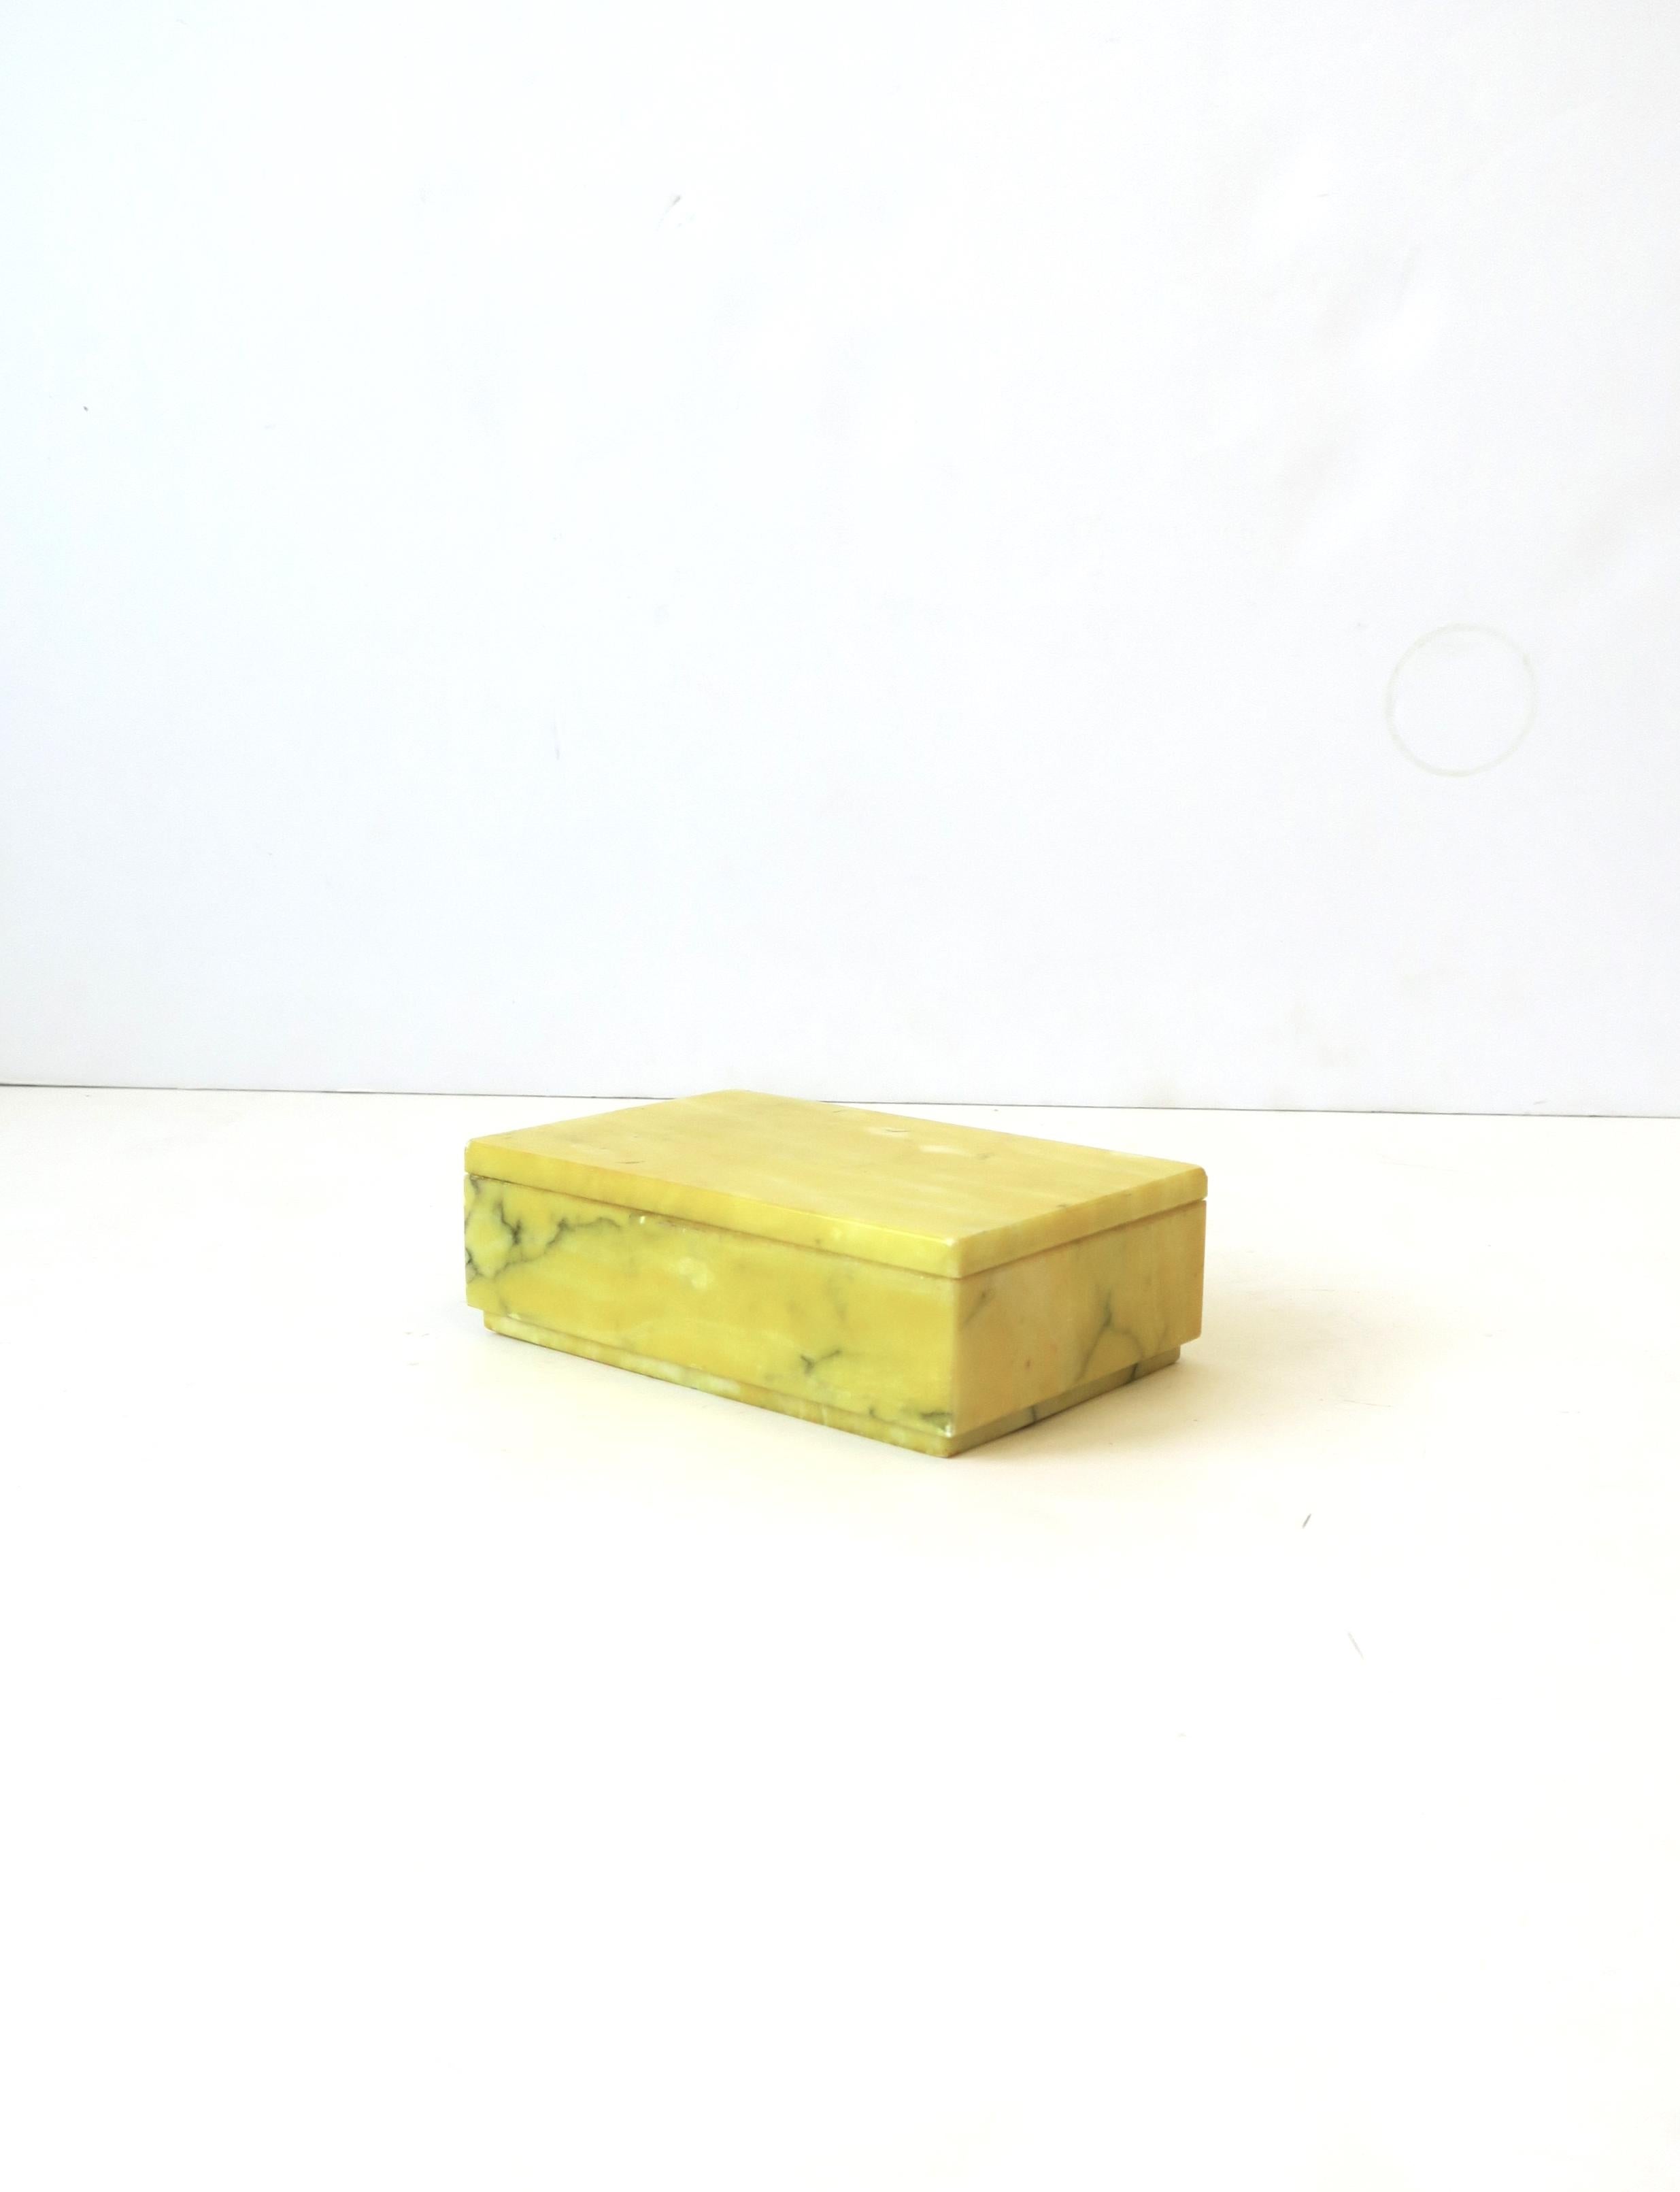 An Italian '70s modern bright yellow alabaster marble jewelry box, circa 1970s, Italy. Beautiful as a standalone piece, for jewelry (as demonstrated), or other small items on a nightstand table, vanity, console, desk, walk-in-closet, etc. Box is